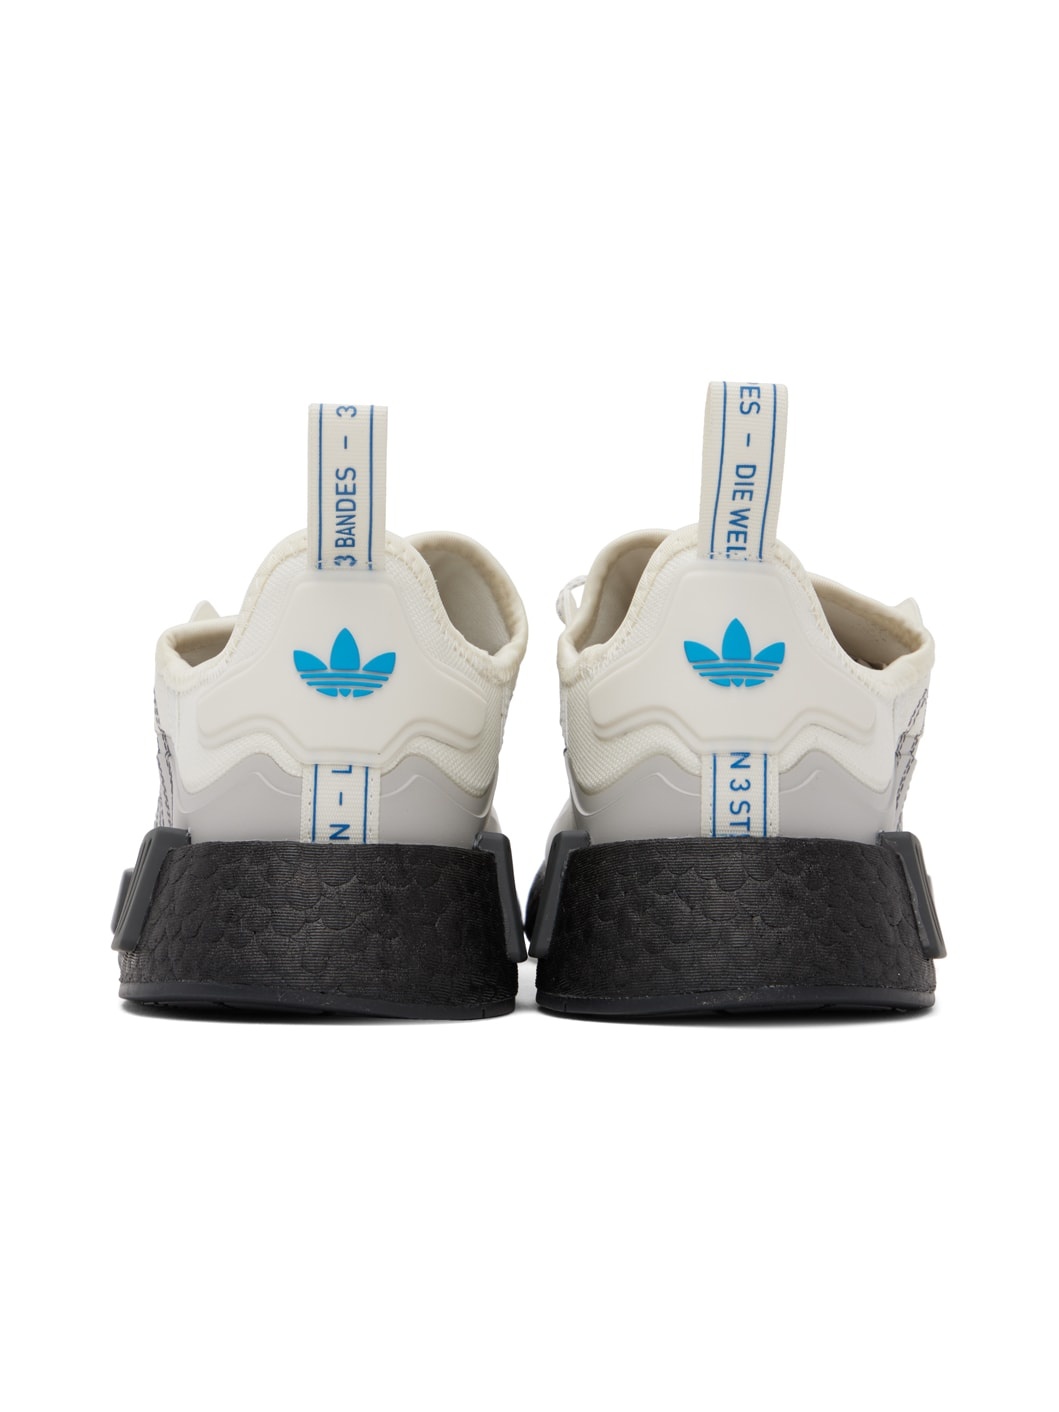 Off-White NMD R1 Sneakers - 2